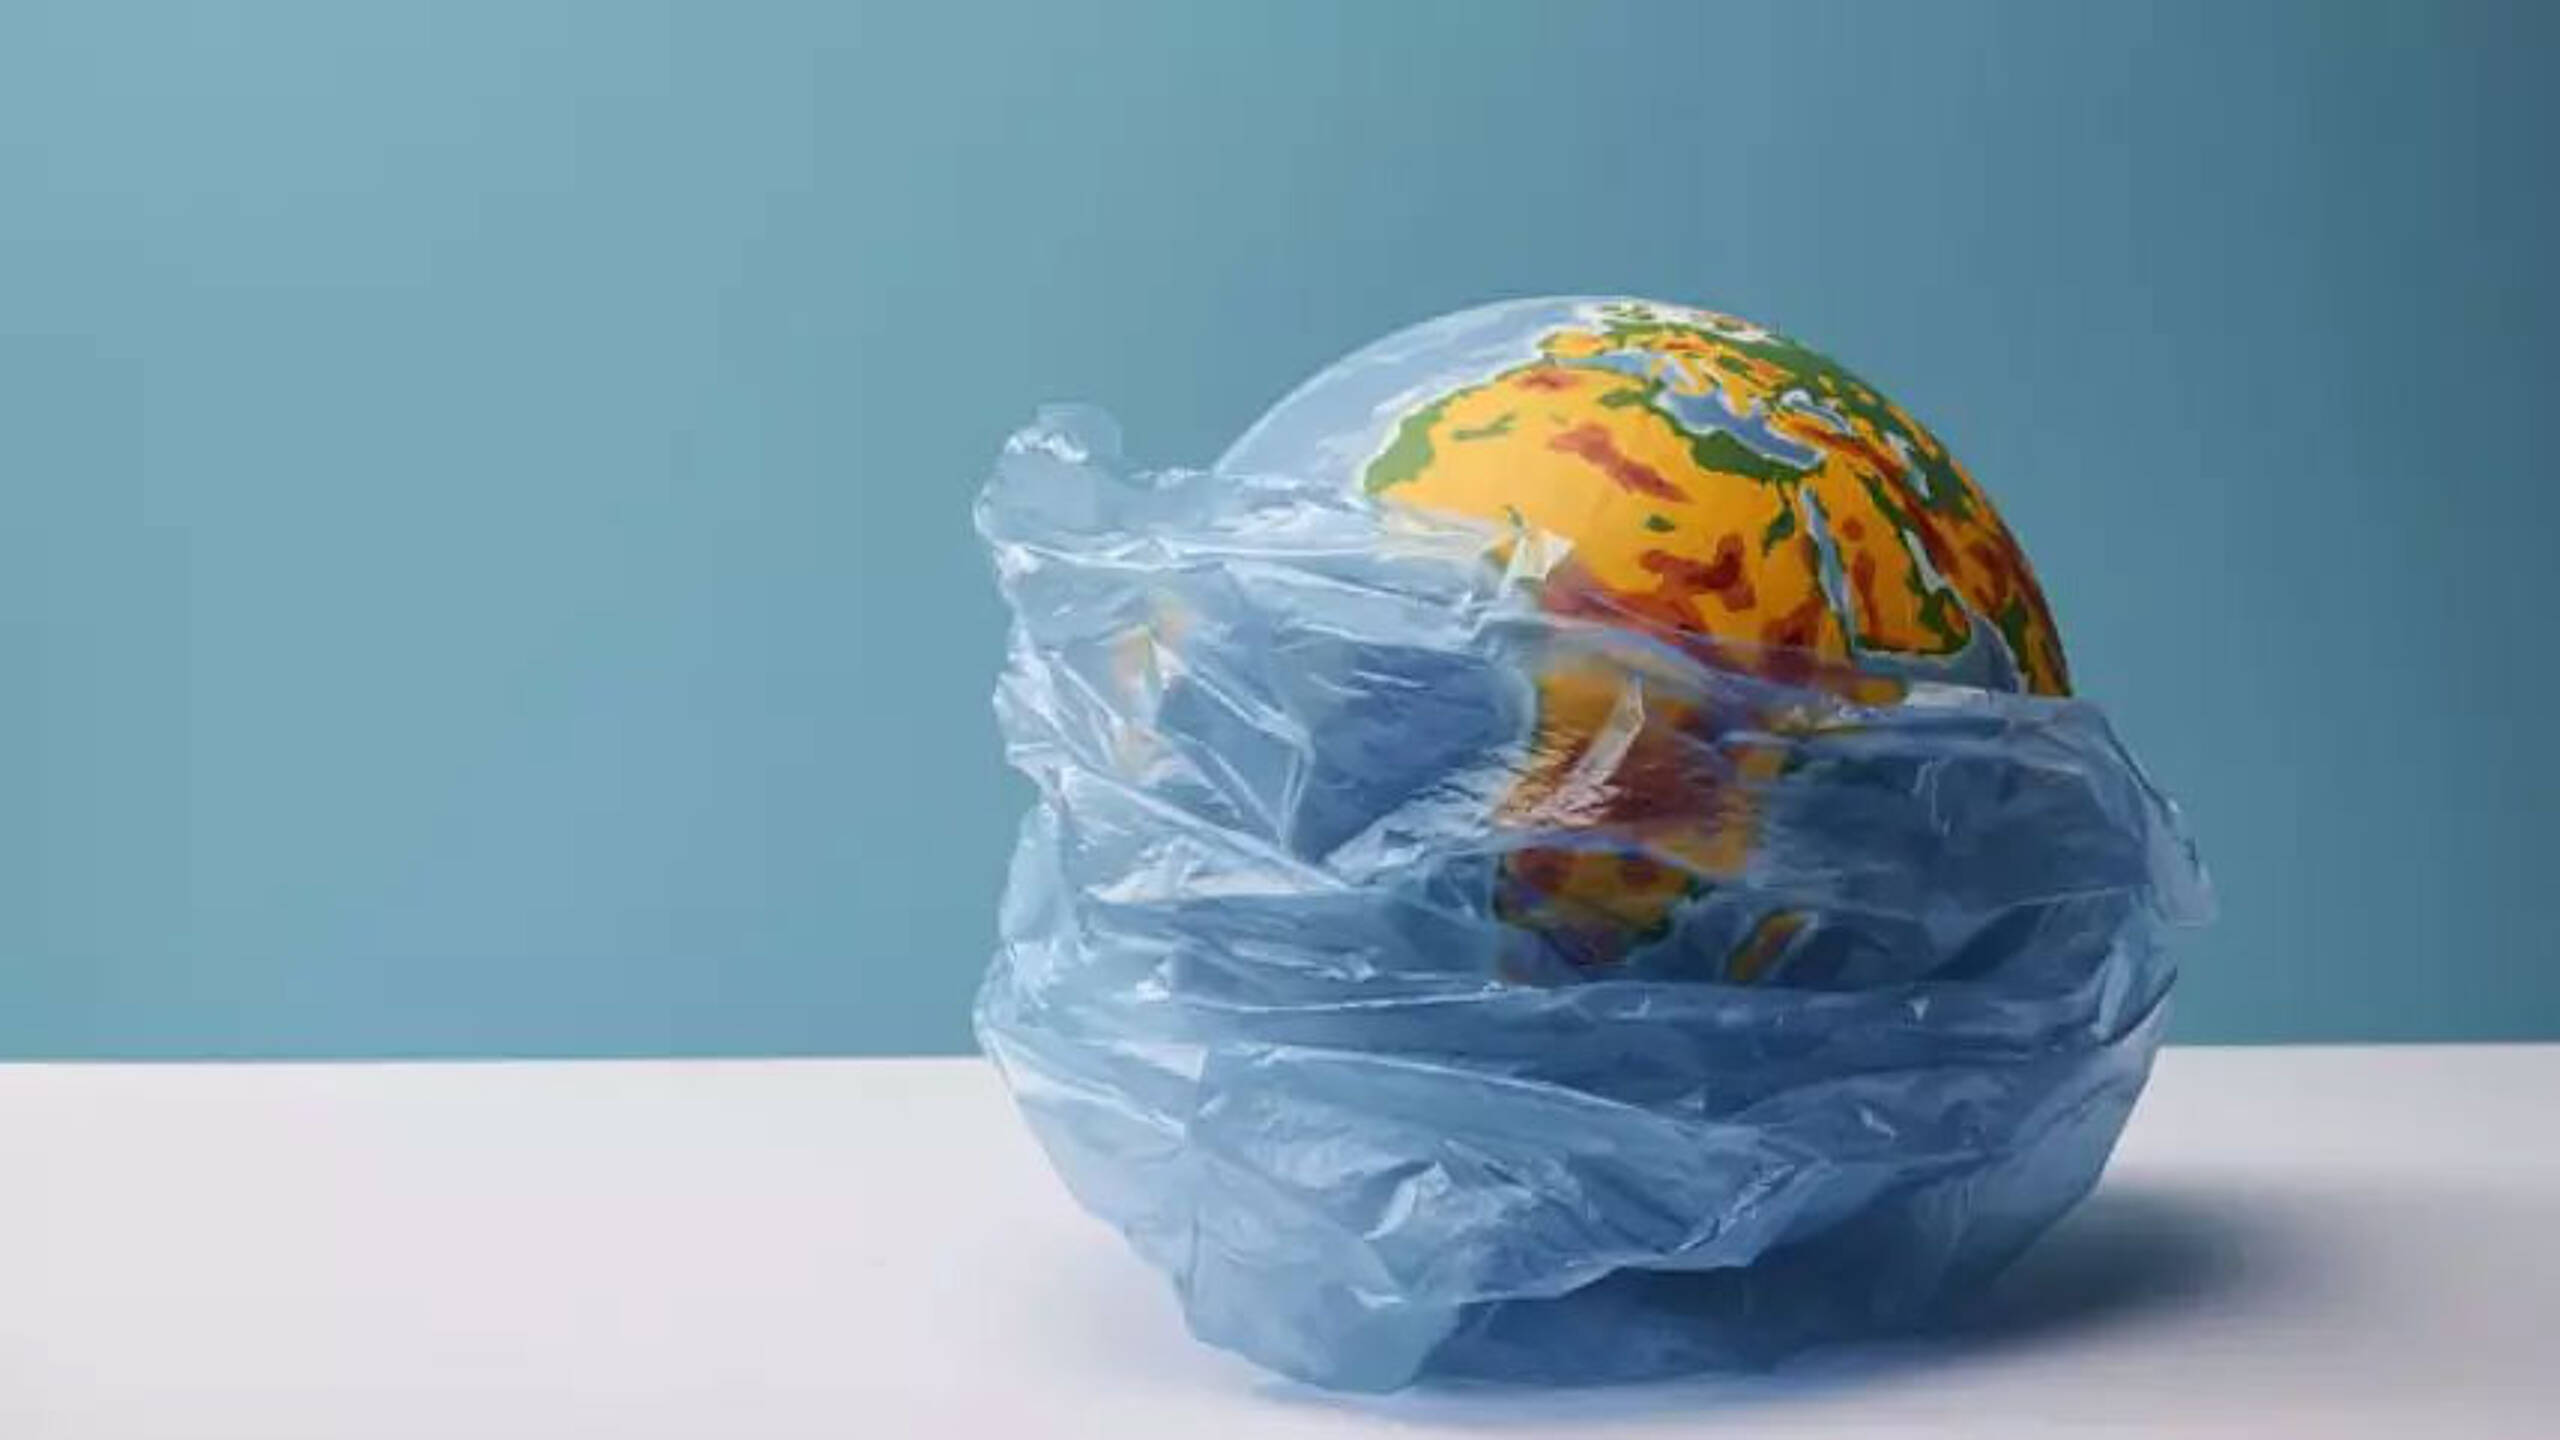 Earth Overshoot Day: Everything you need to know about shifting to a circular economy